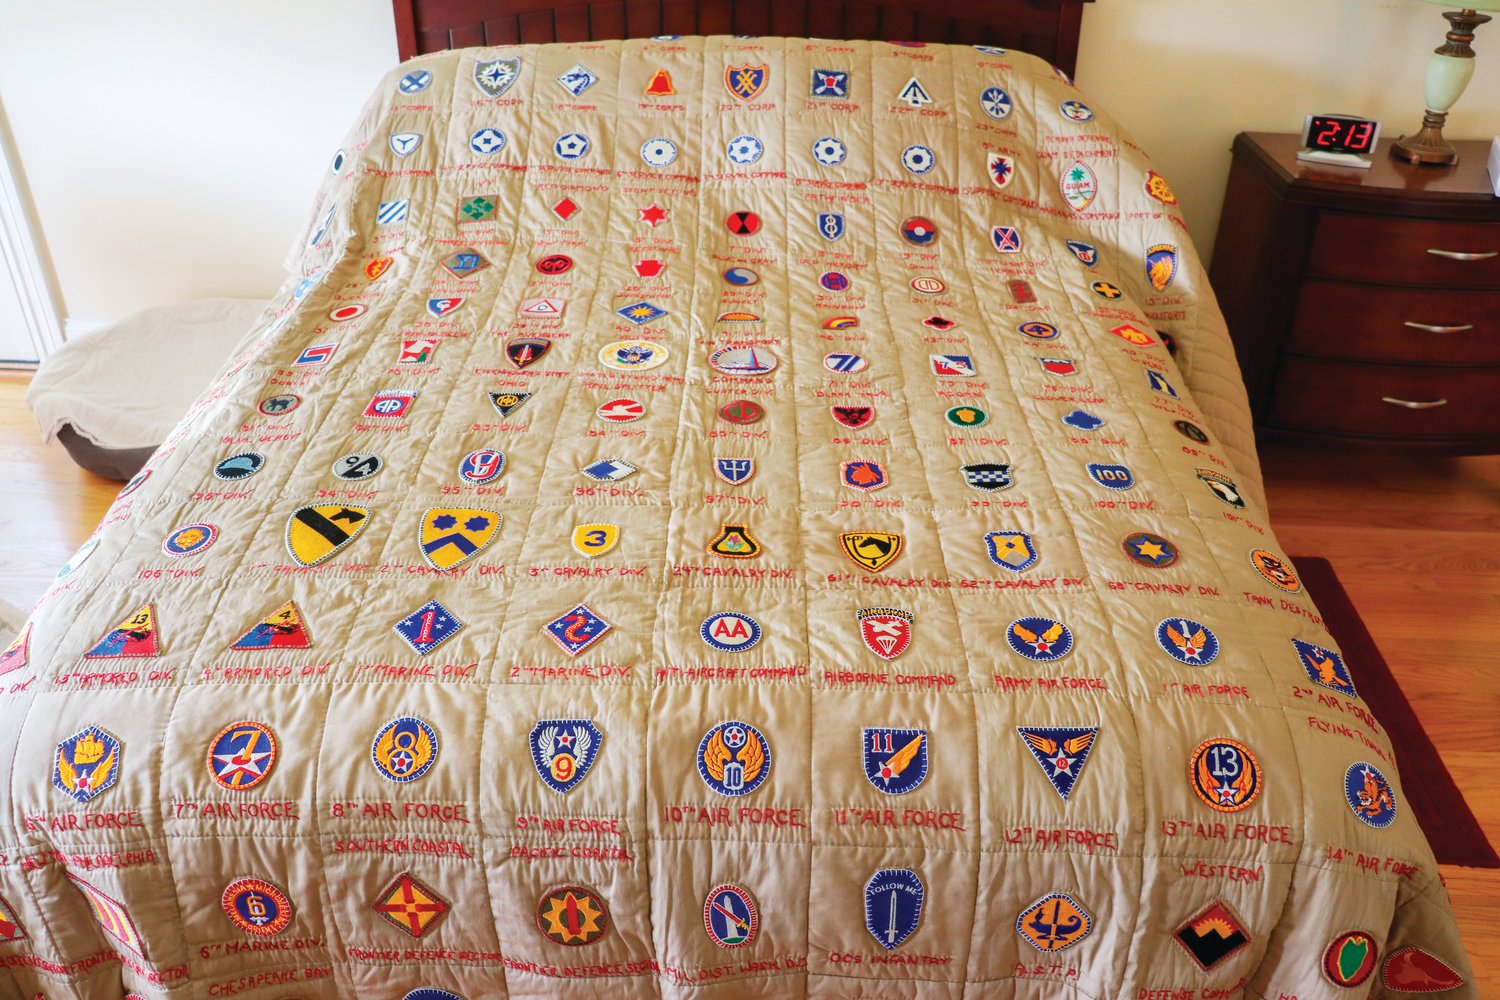 This quilt was made by Wesley Hart's late wife, Agnes. The badges represent units and locations where Hart served during World War II.